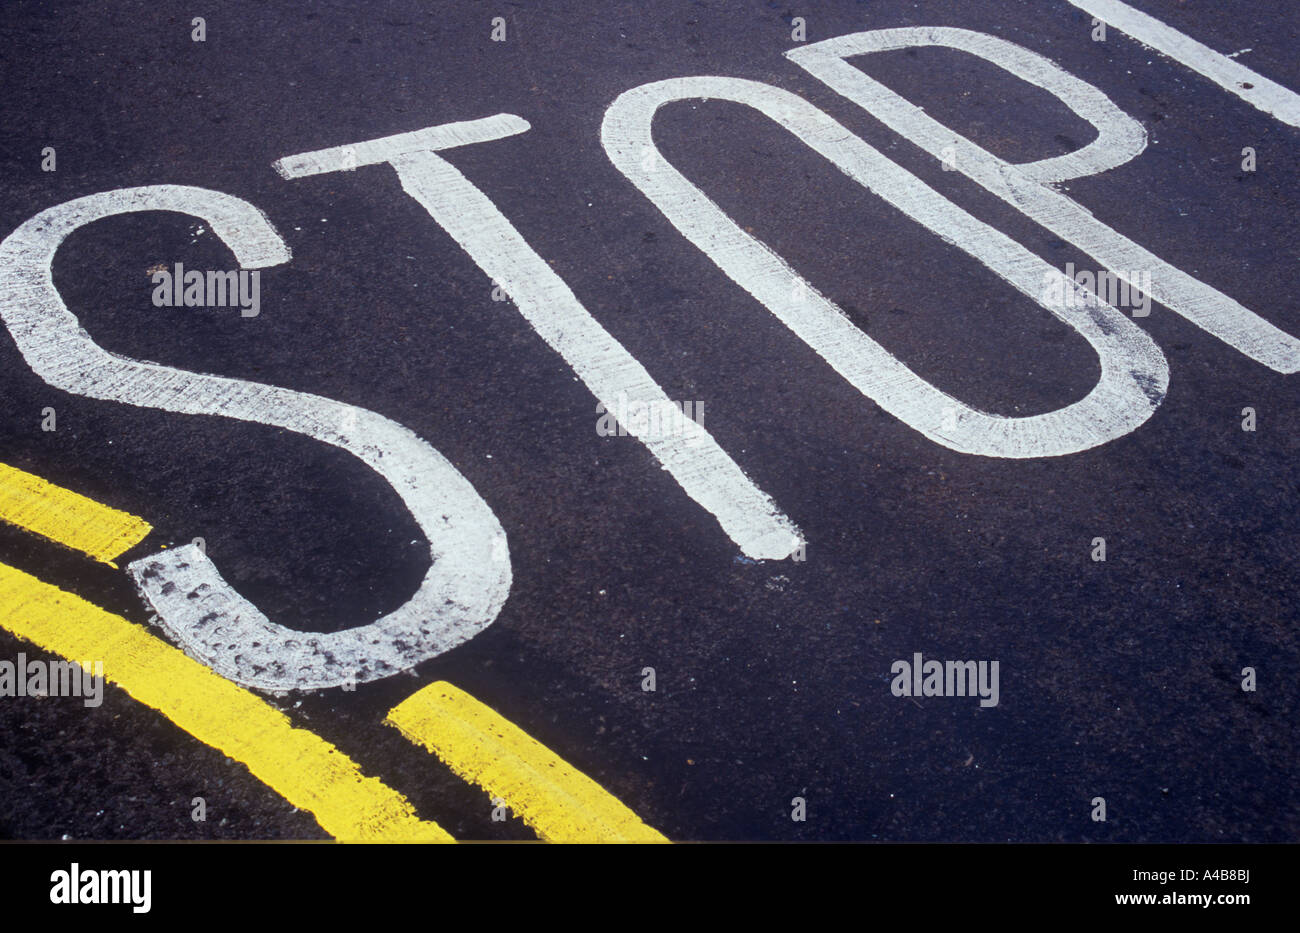 Detail of black tarmac road surface with Stop painted on it and part of a curved double yellow no parking line Stock Photo